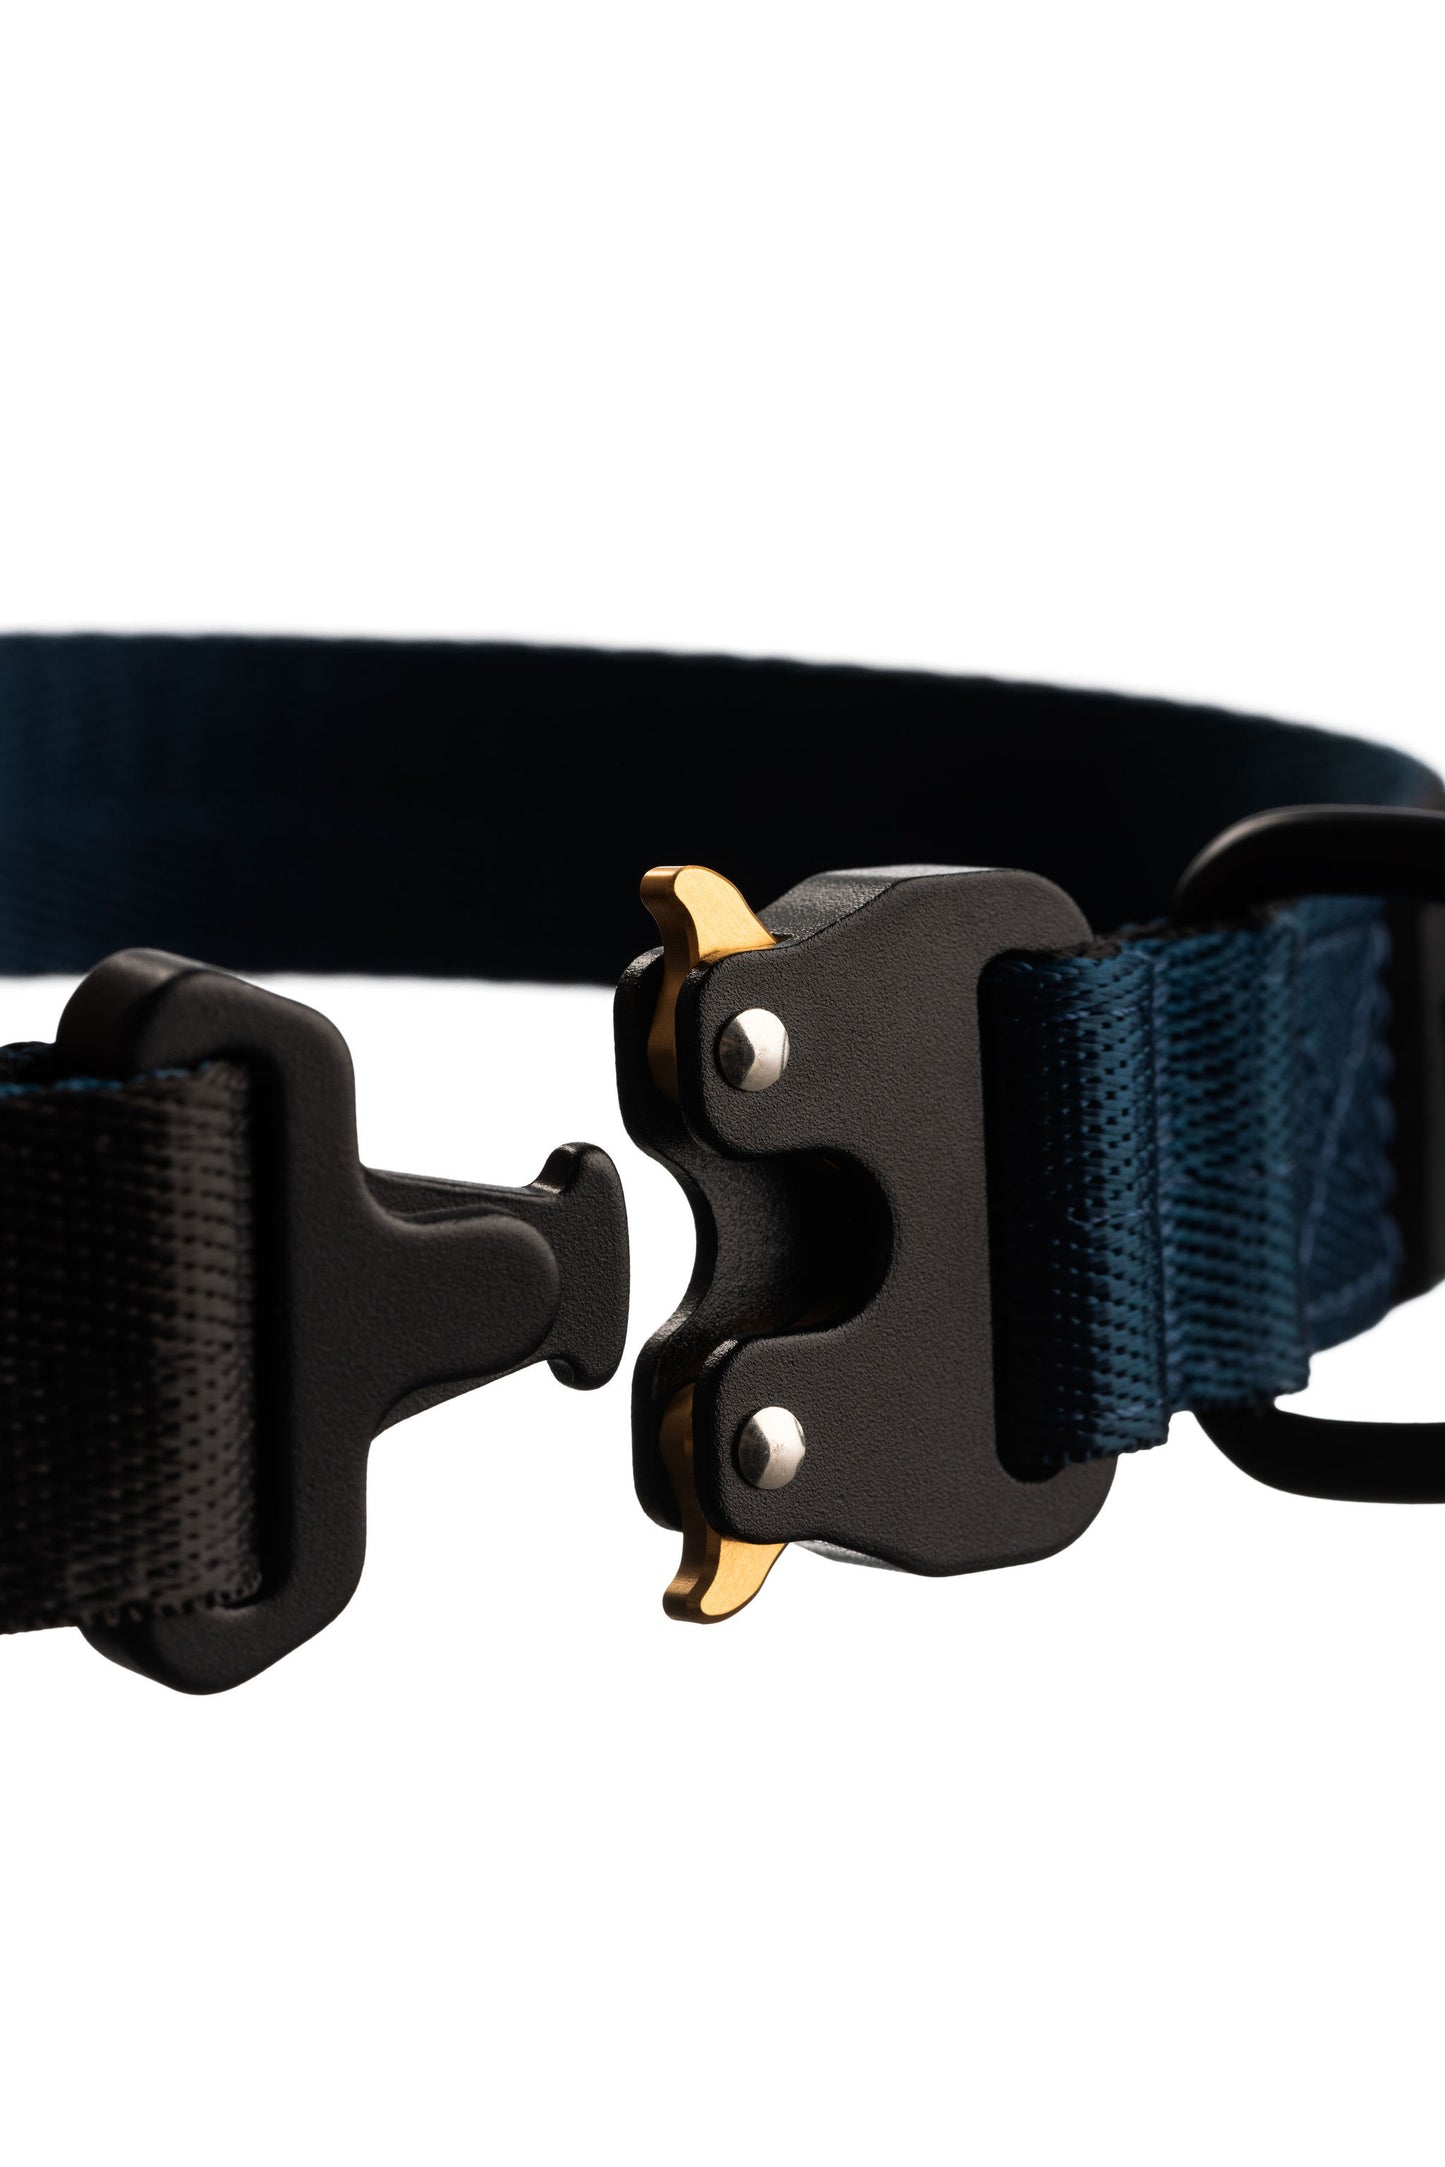 Close up of dog collar clip open. Black clip with gold tabs.